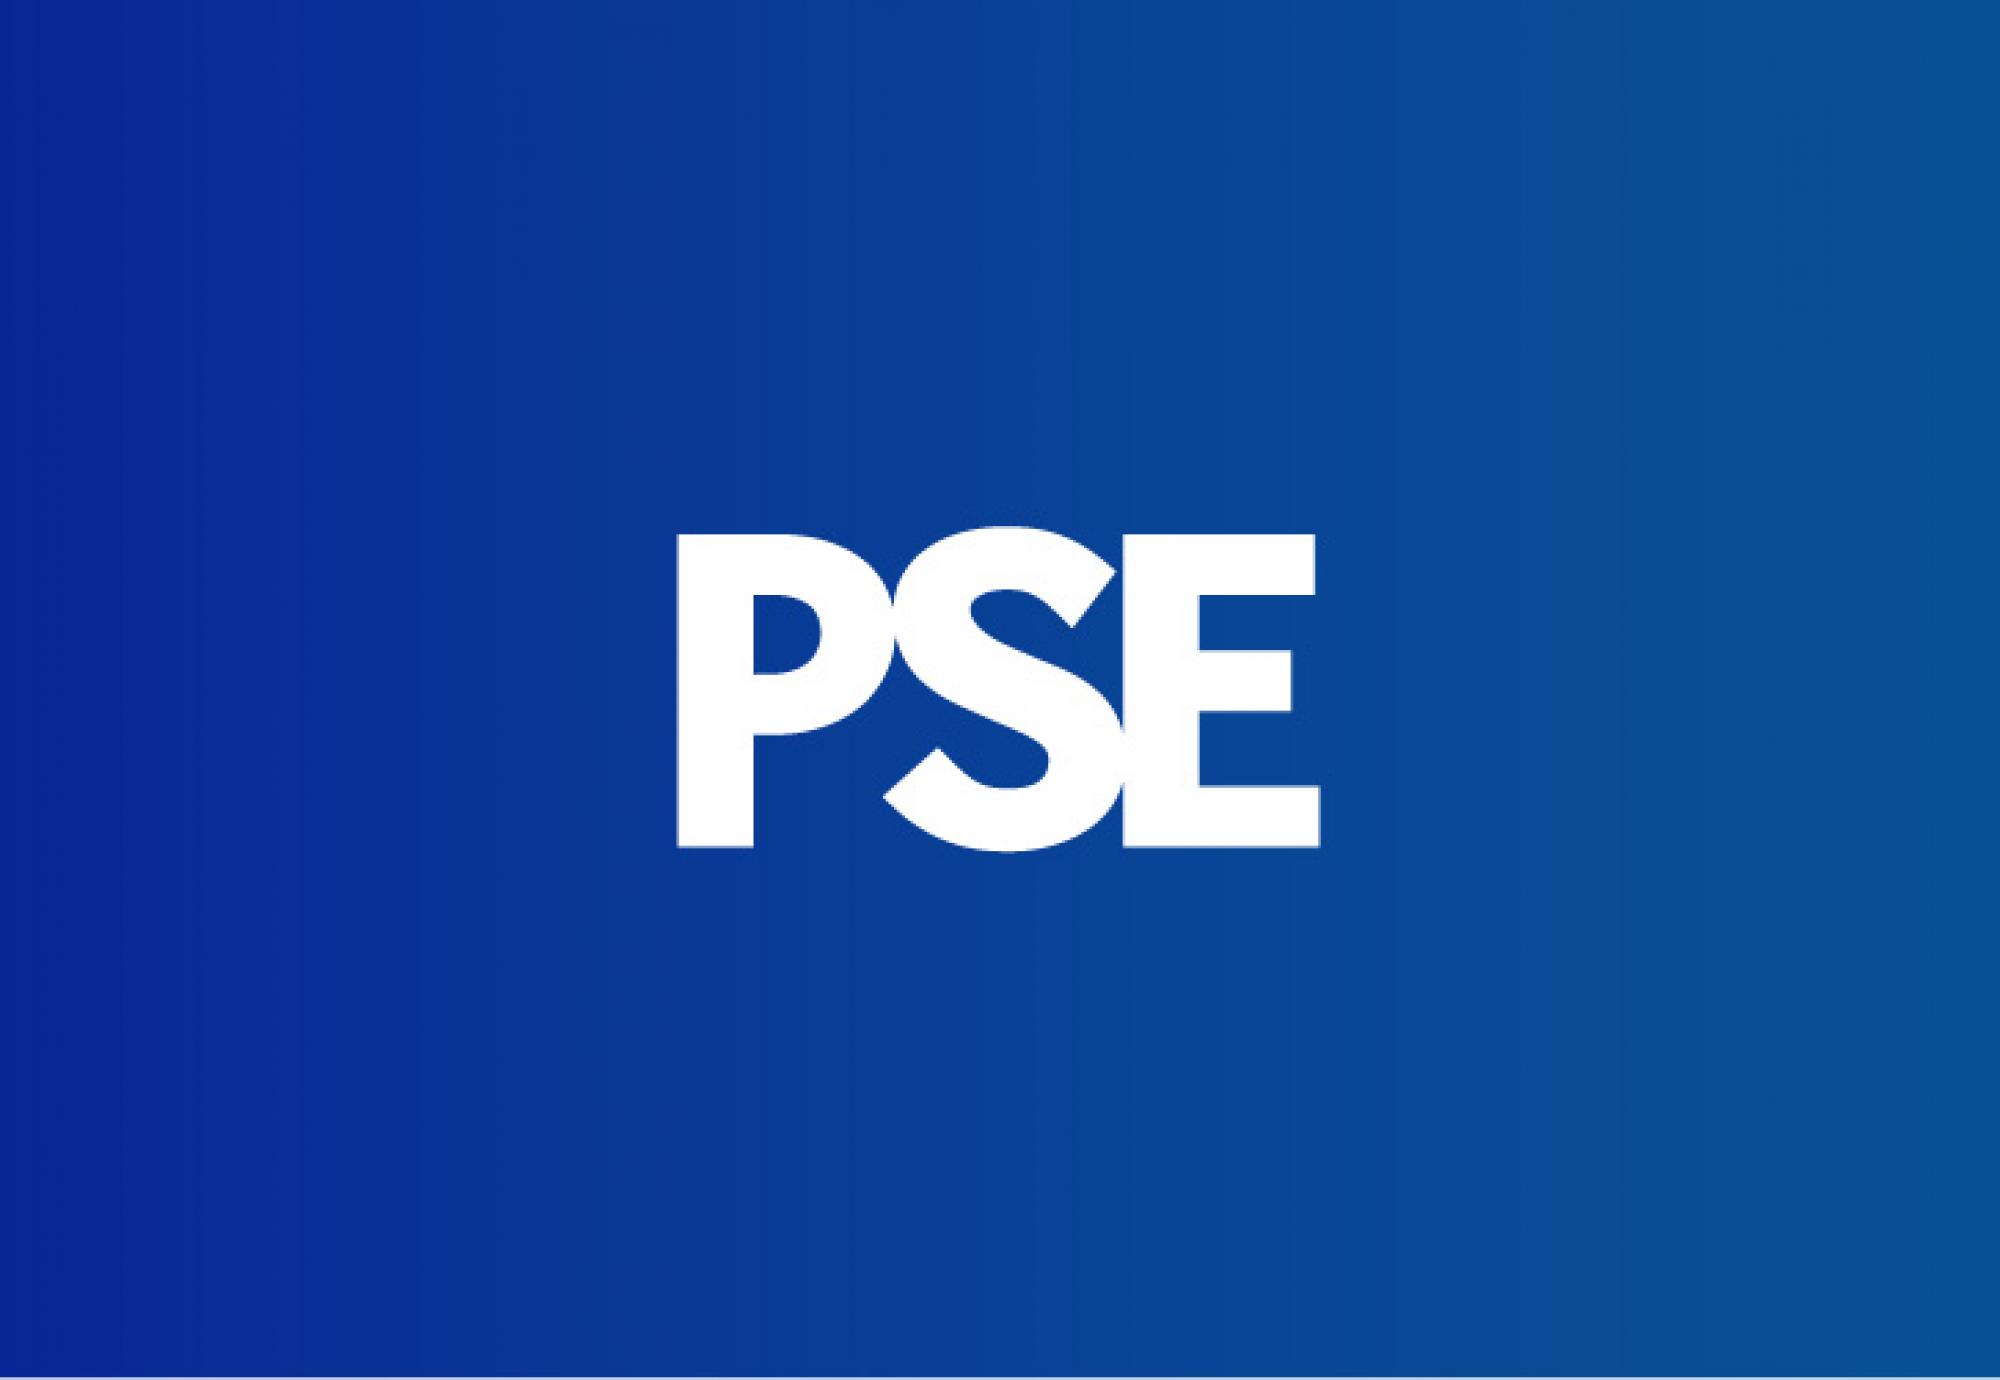 PSE Podcast Headers